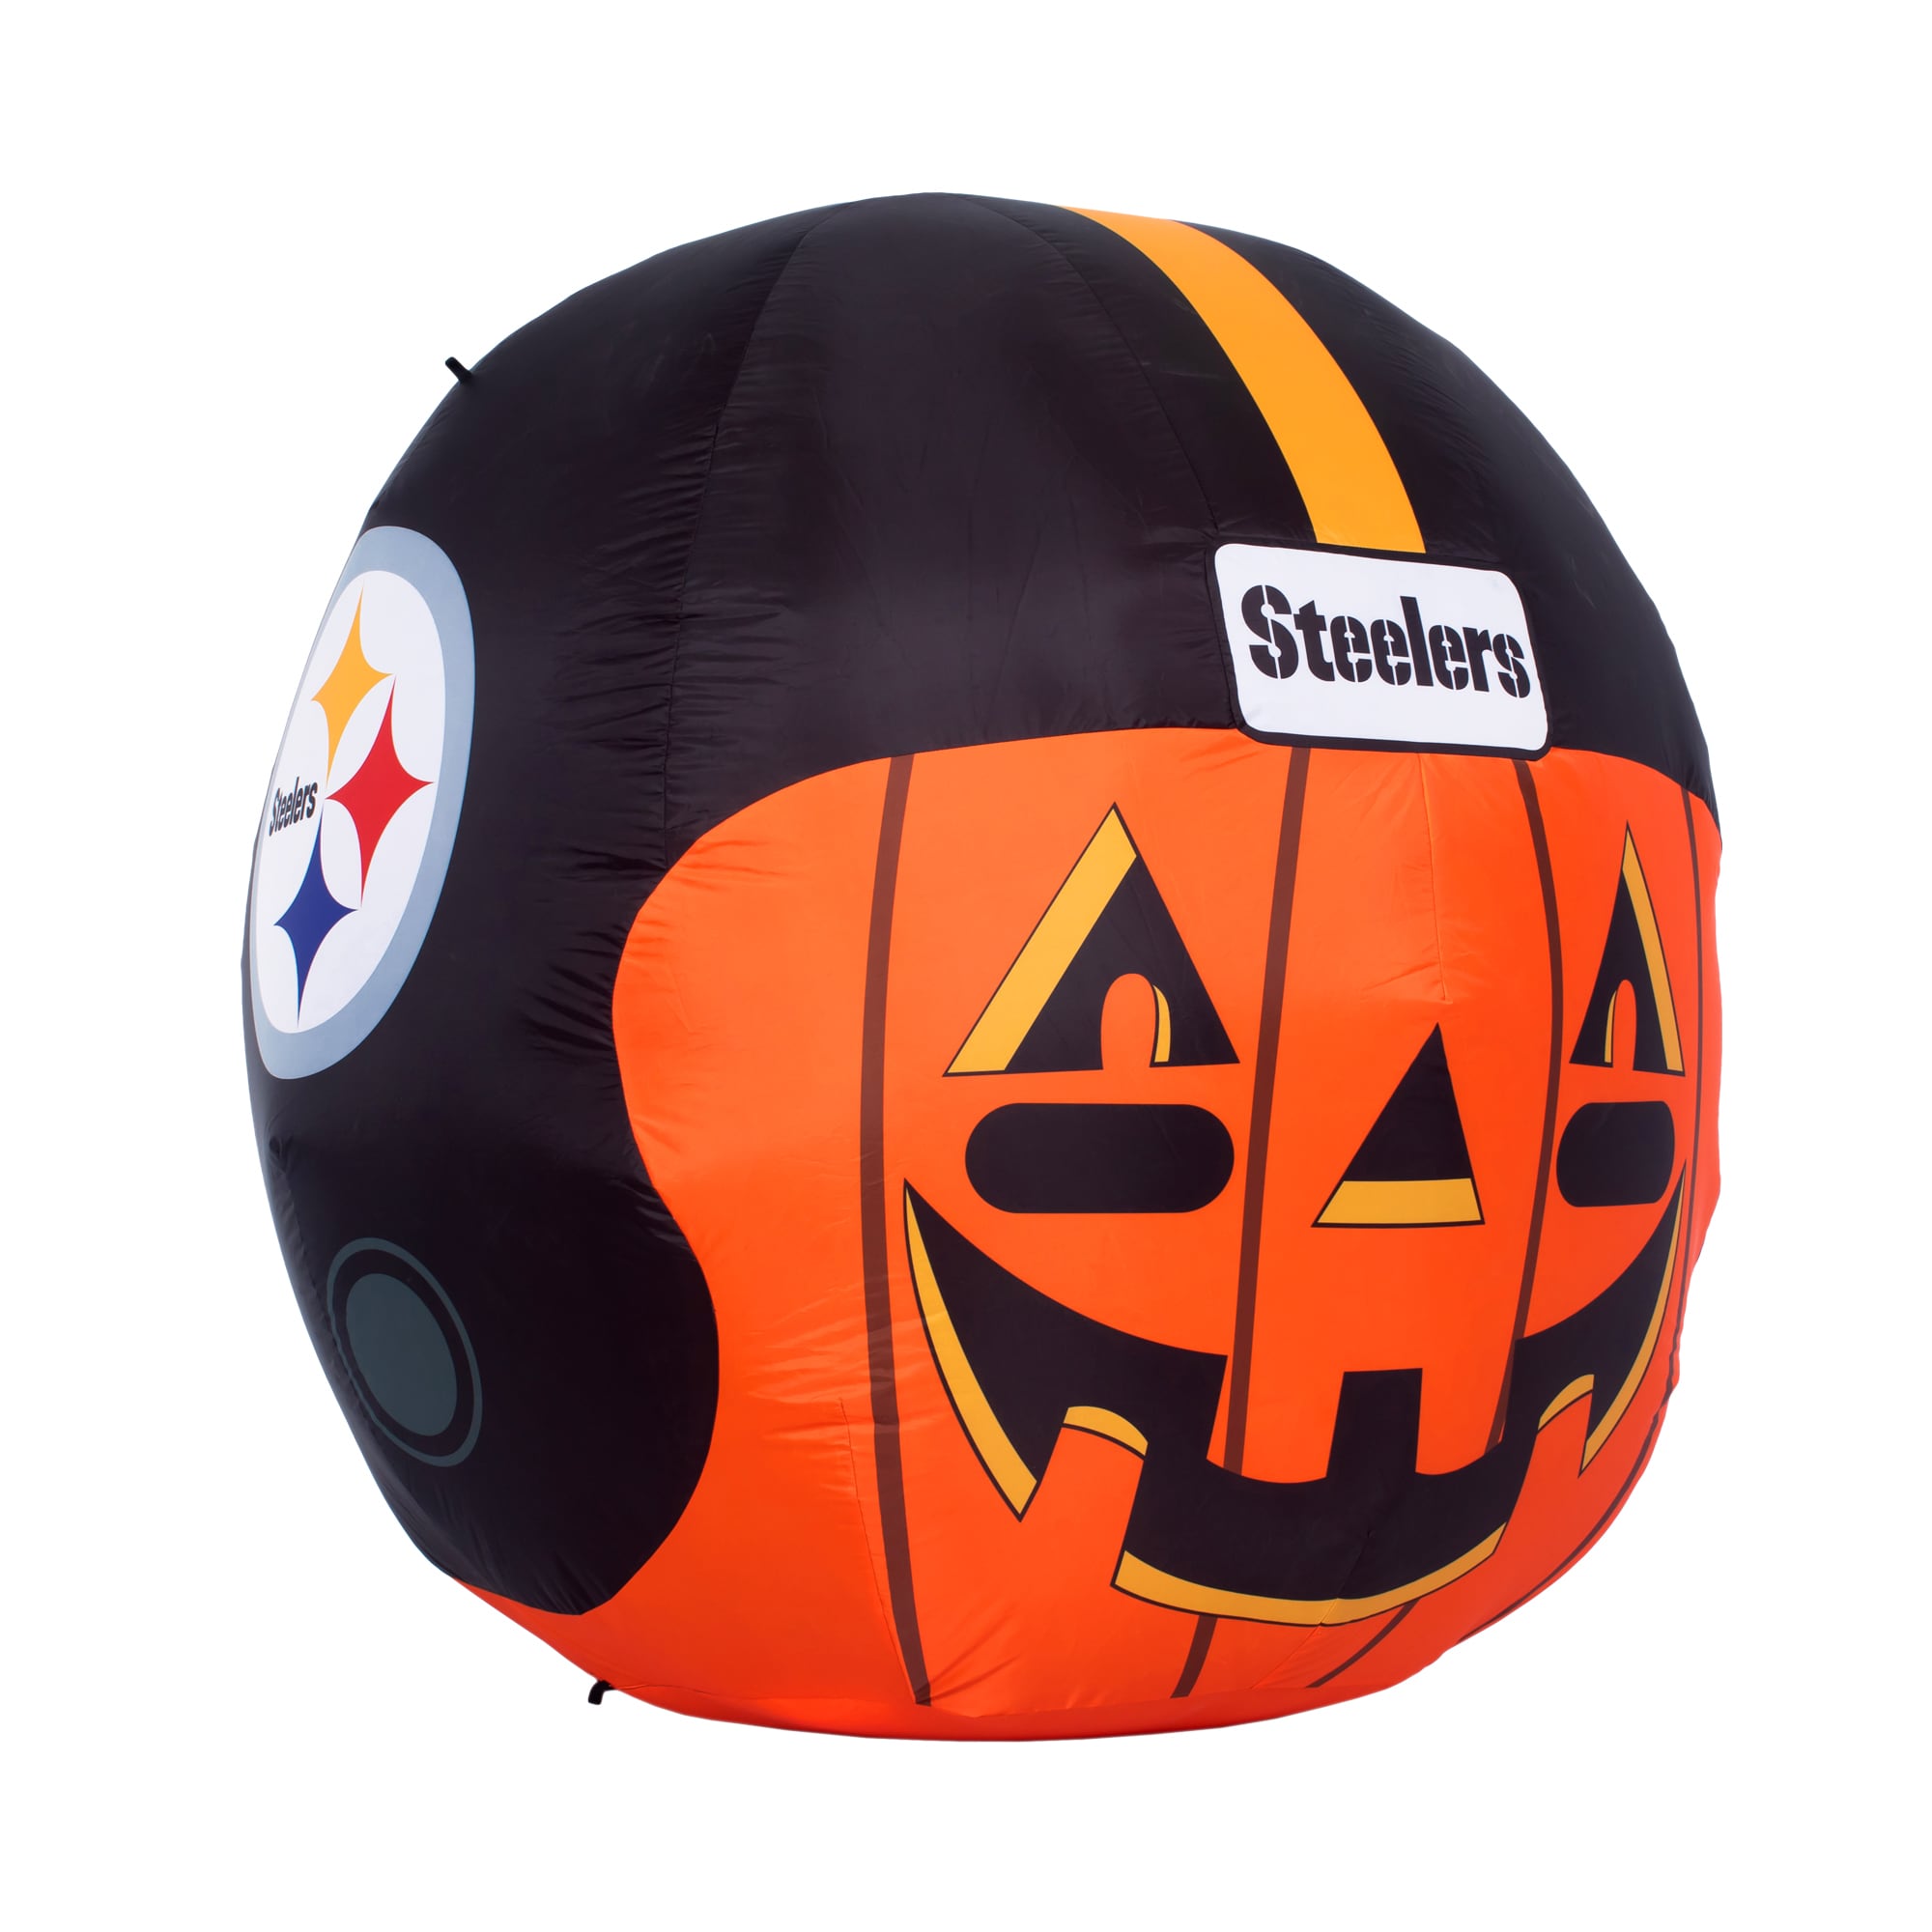 Steelers Levitating Football Floats, Spins And Lights Up  Pittsburgh  steelers football, Pittsburgh steelers gifts, Pittsburgh steelers